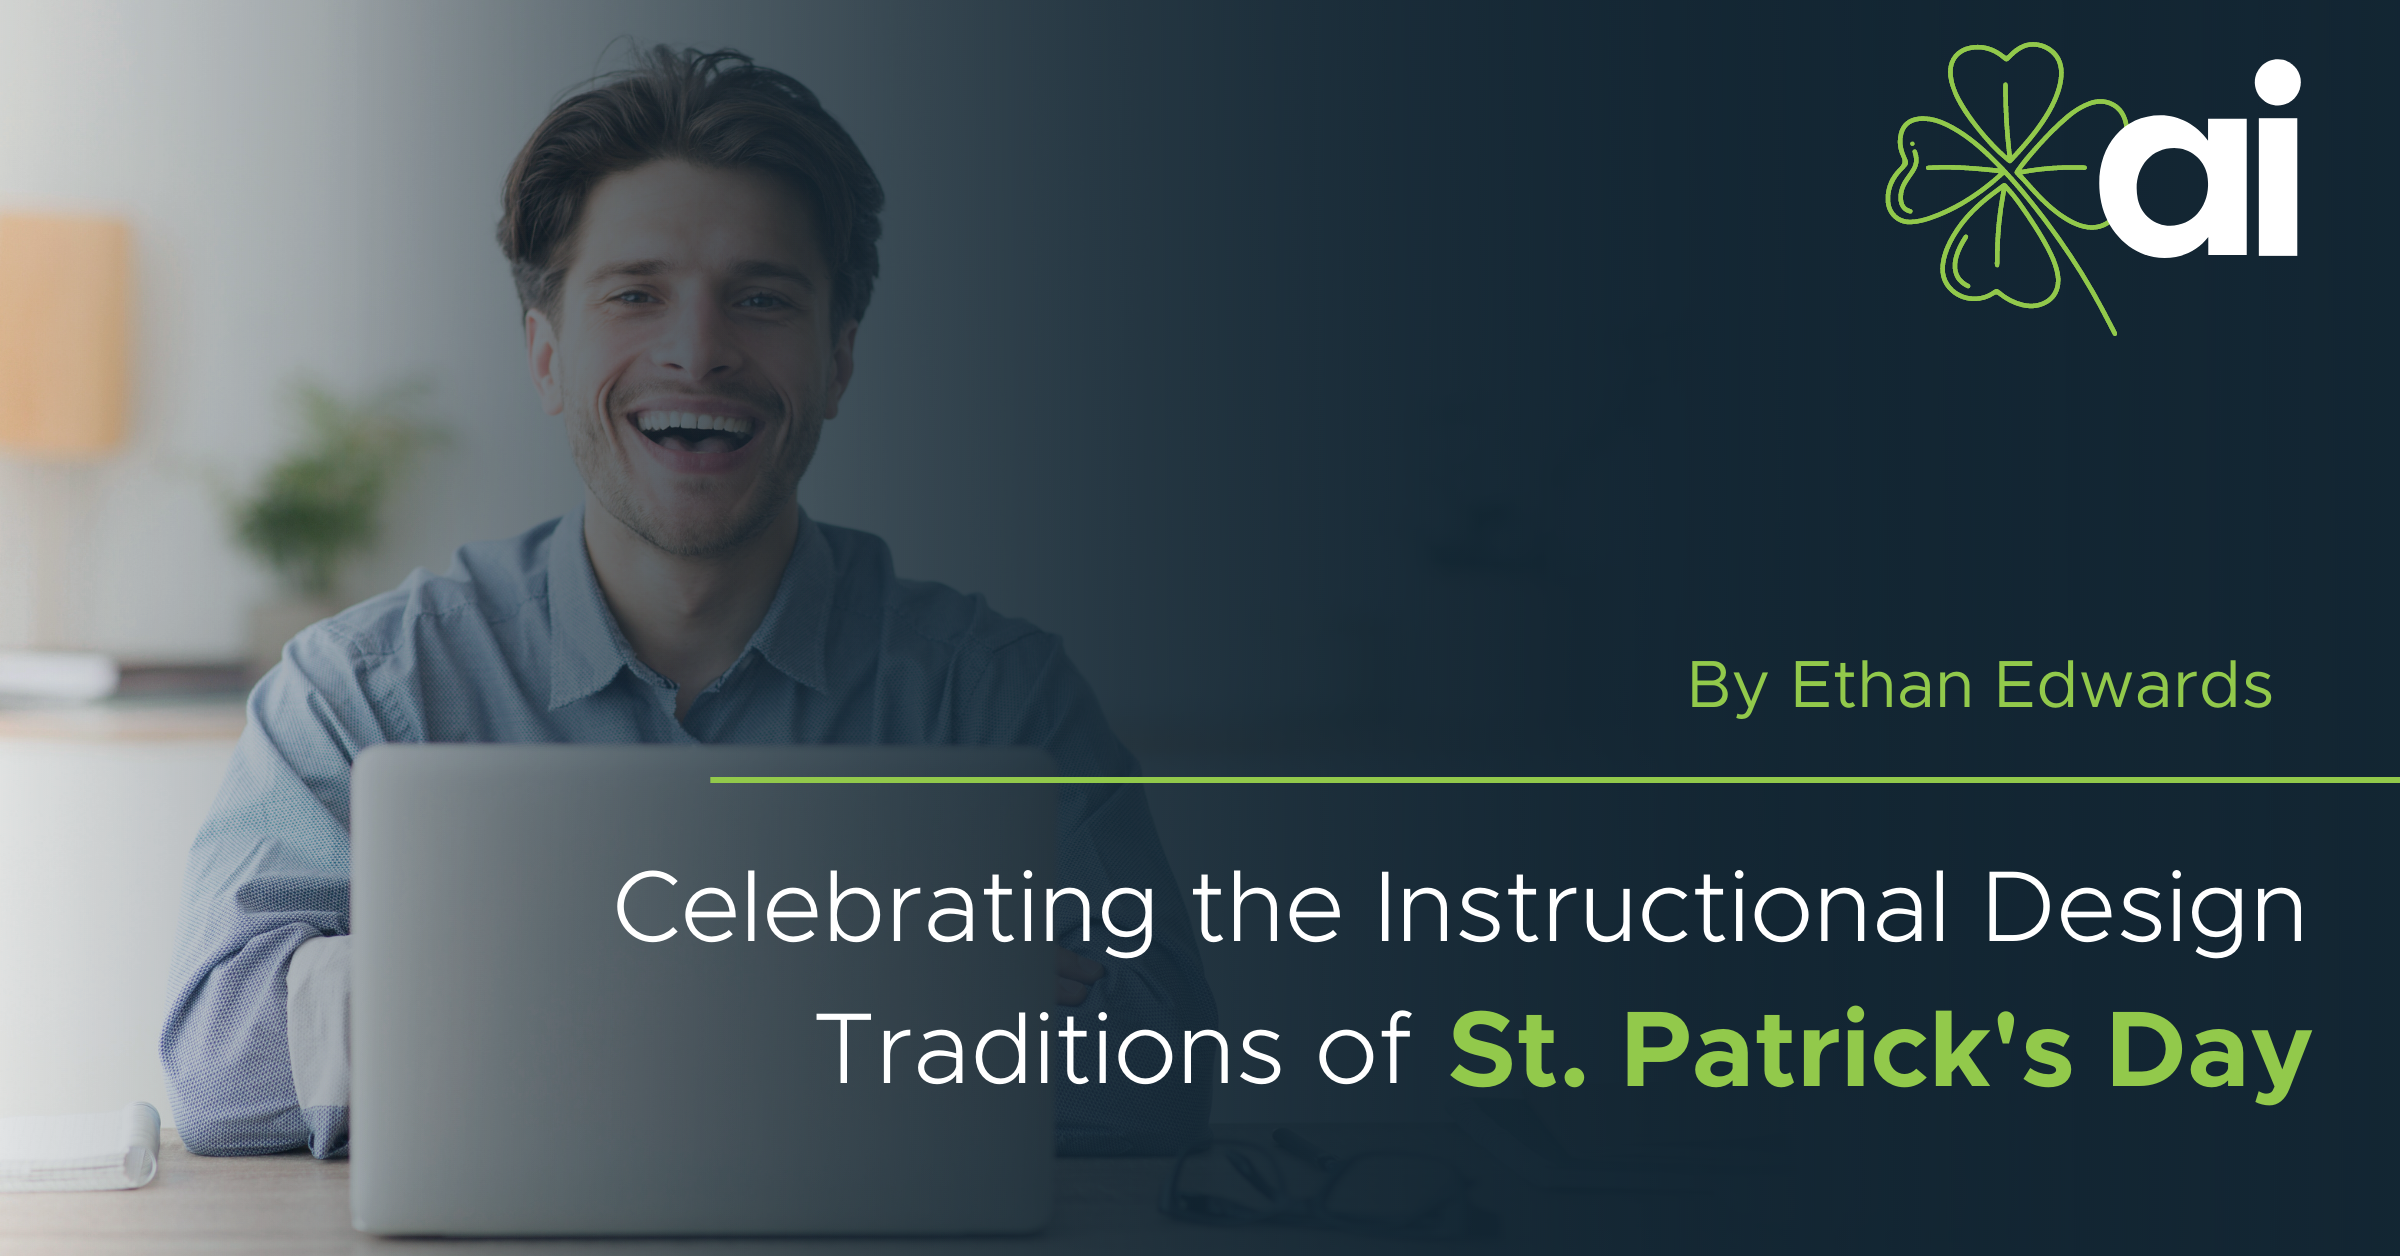 Celebrating the Instructional Design Traditions of St. Patrick's Day